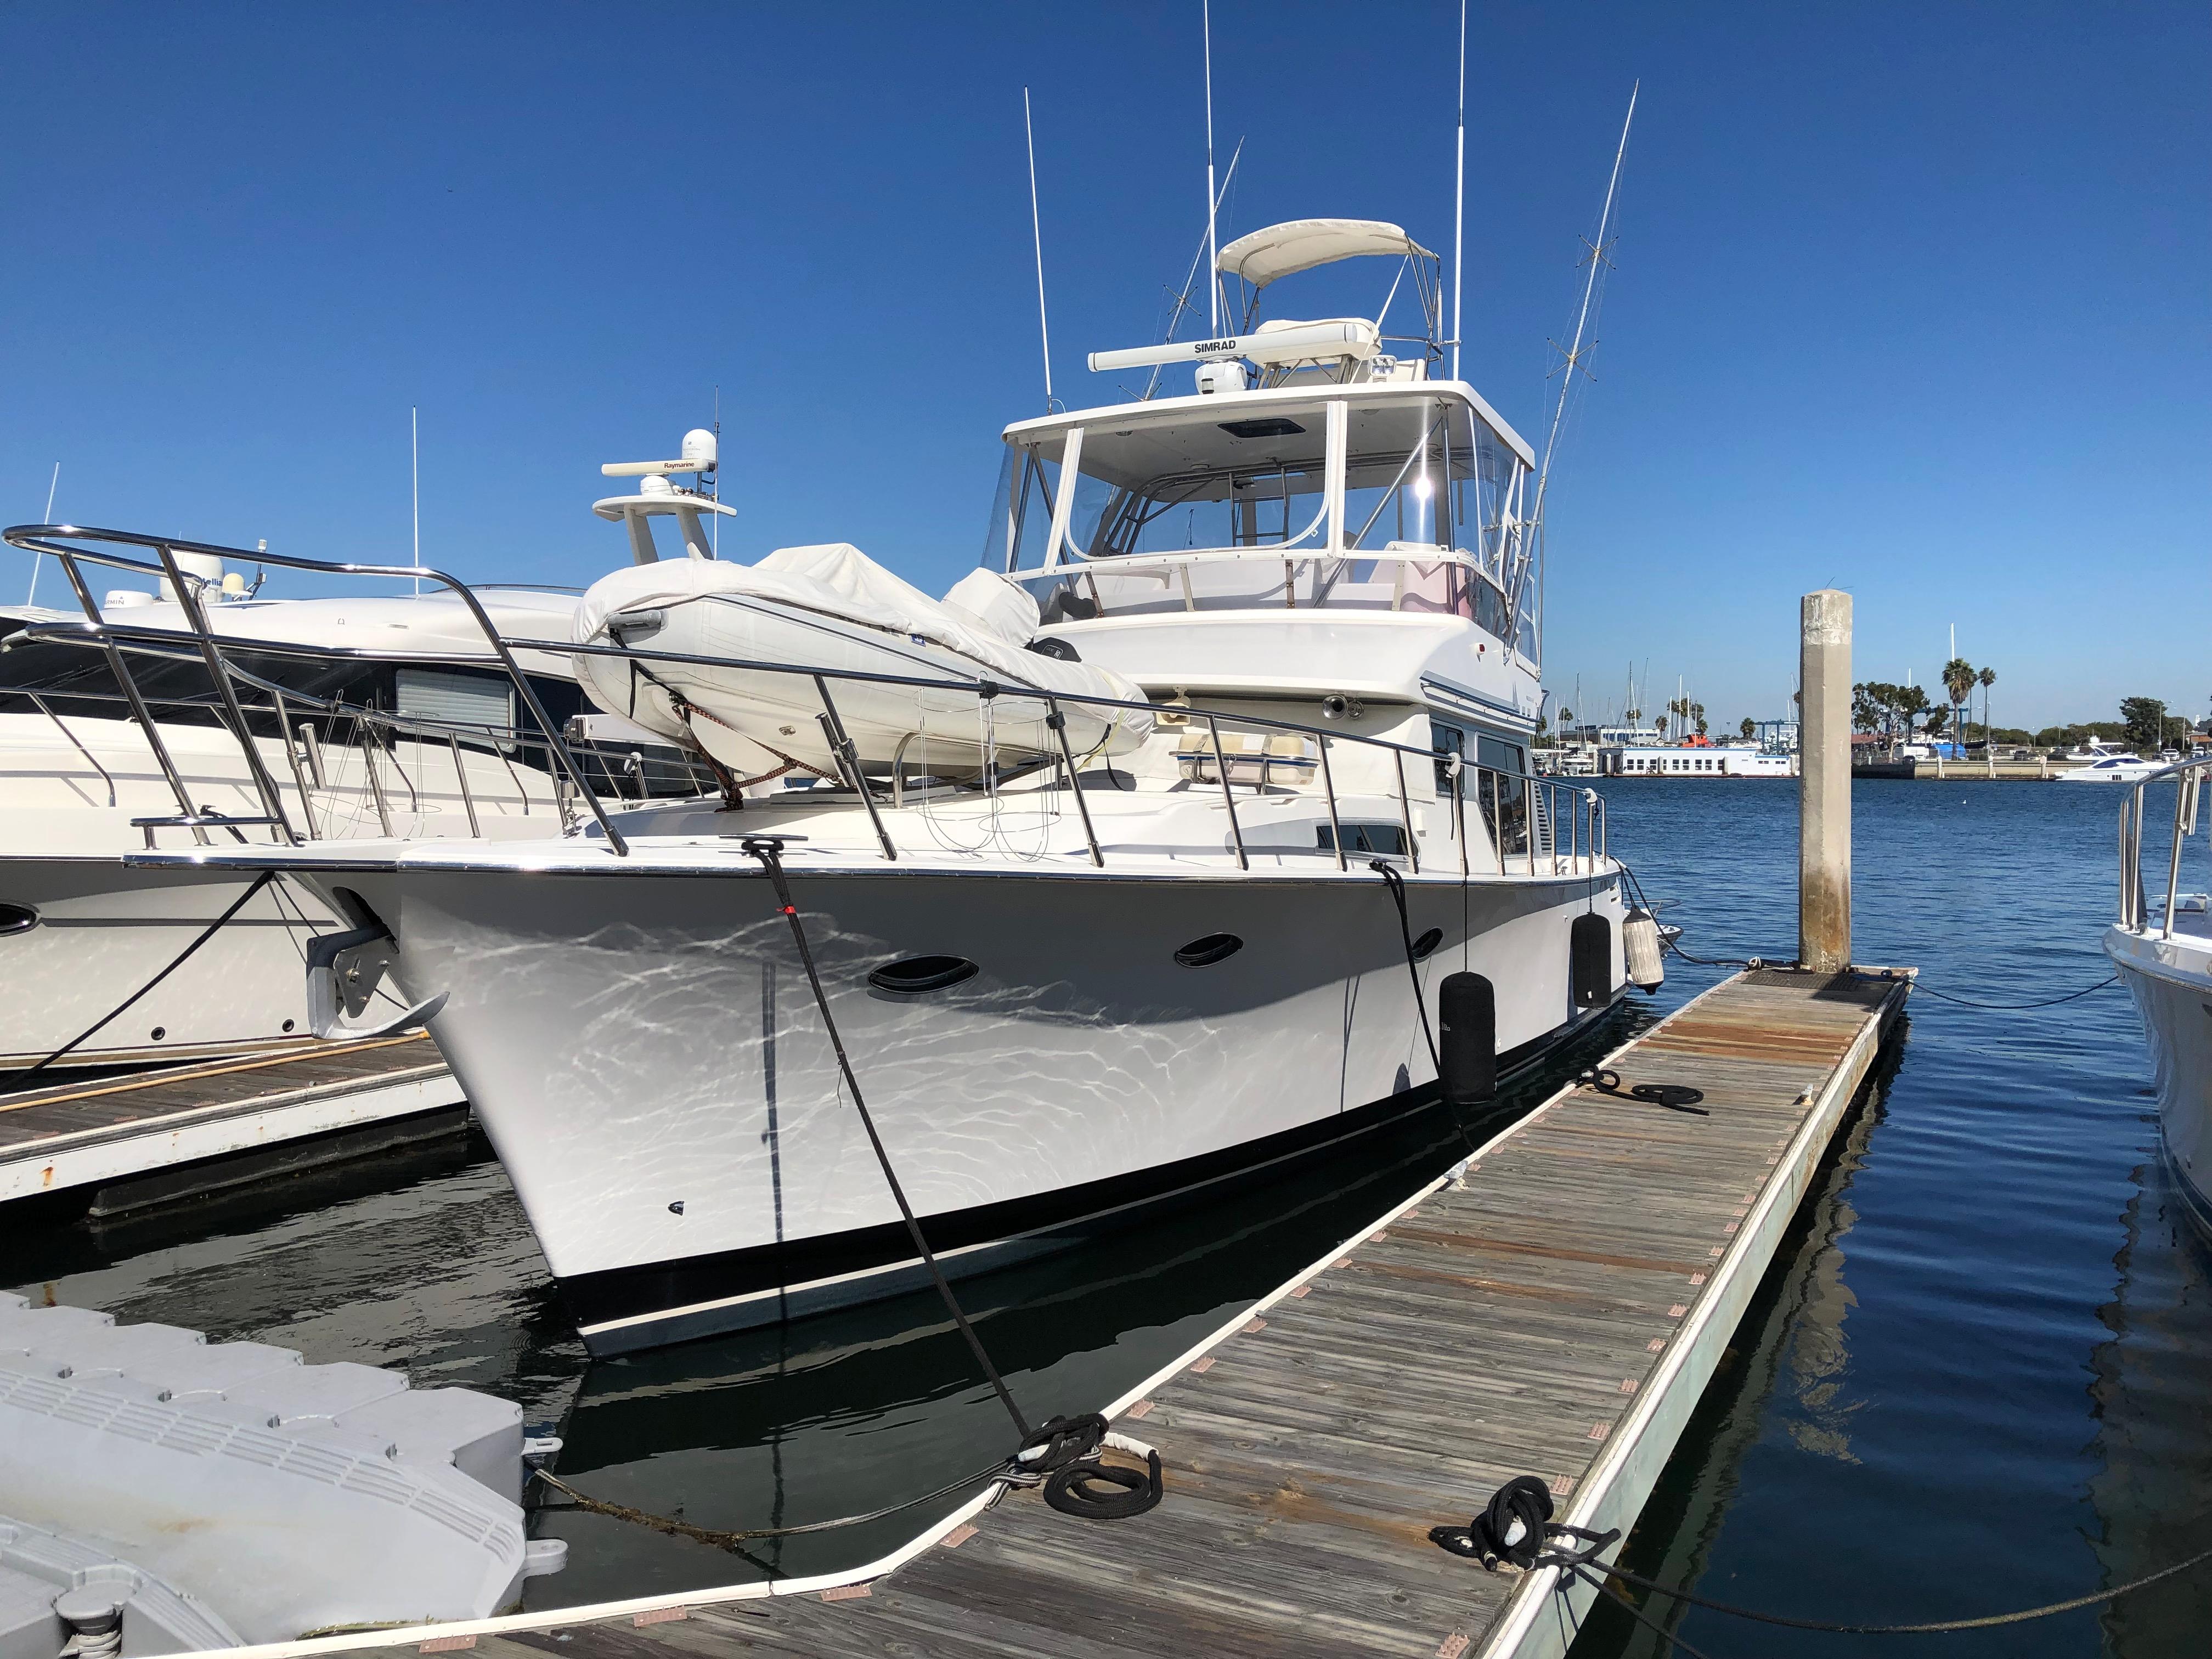 southern cross yacht for sale